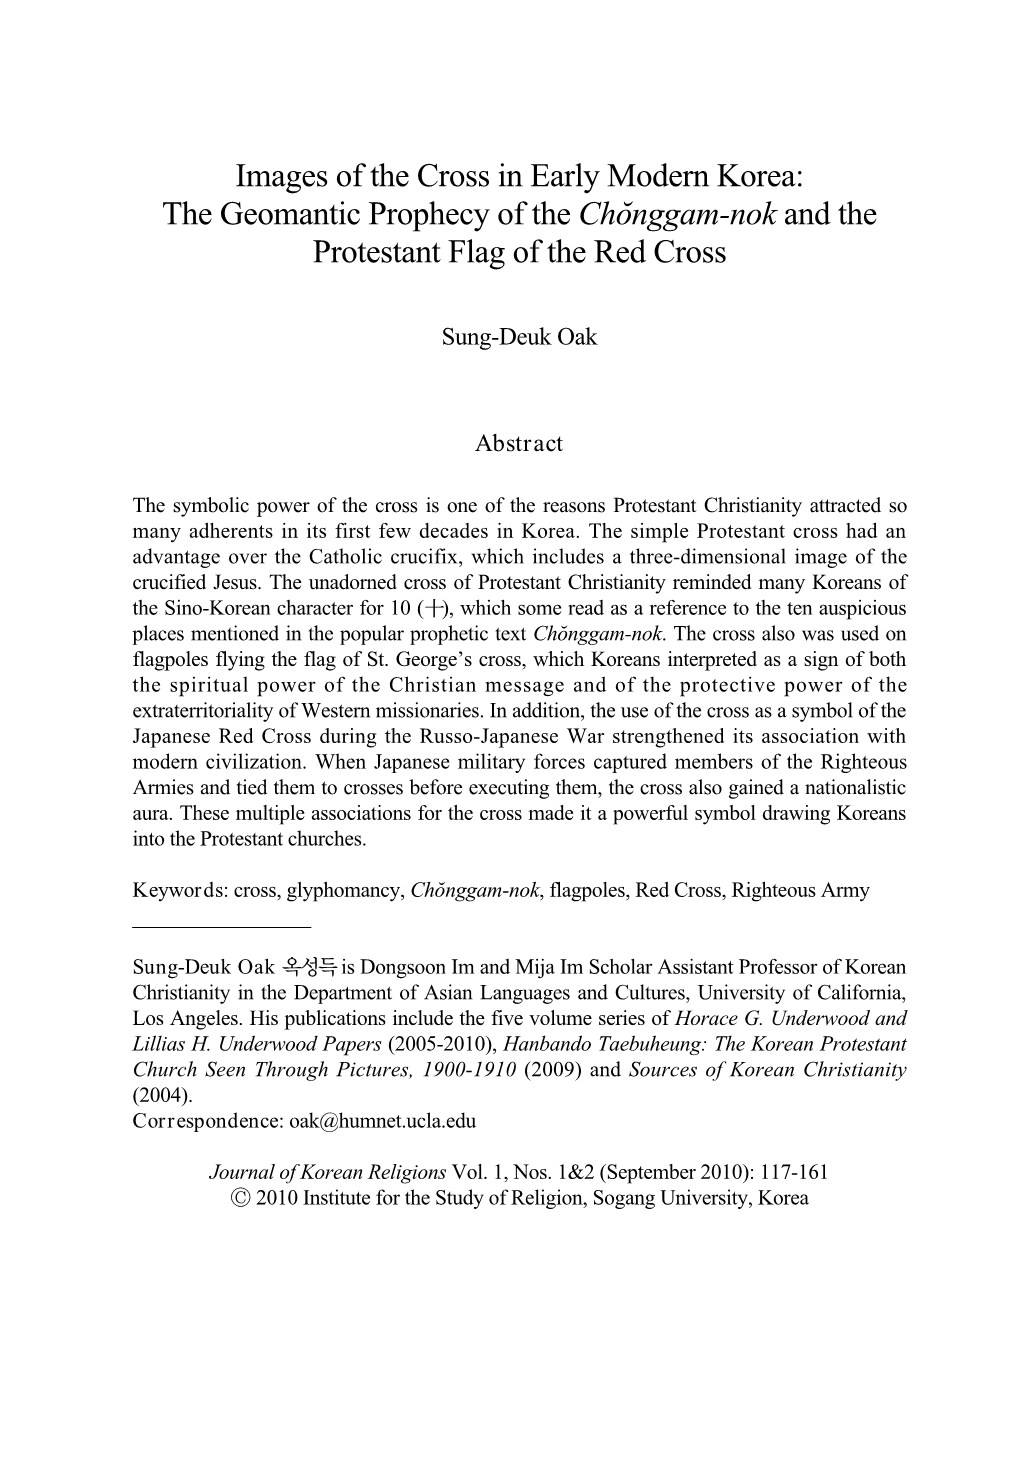 Images of the Cross in Early Modern Korea: the Geomantic Prophecy of the Cho˘Nggam-Nok and the Protestant Flag of the Red Cross